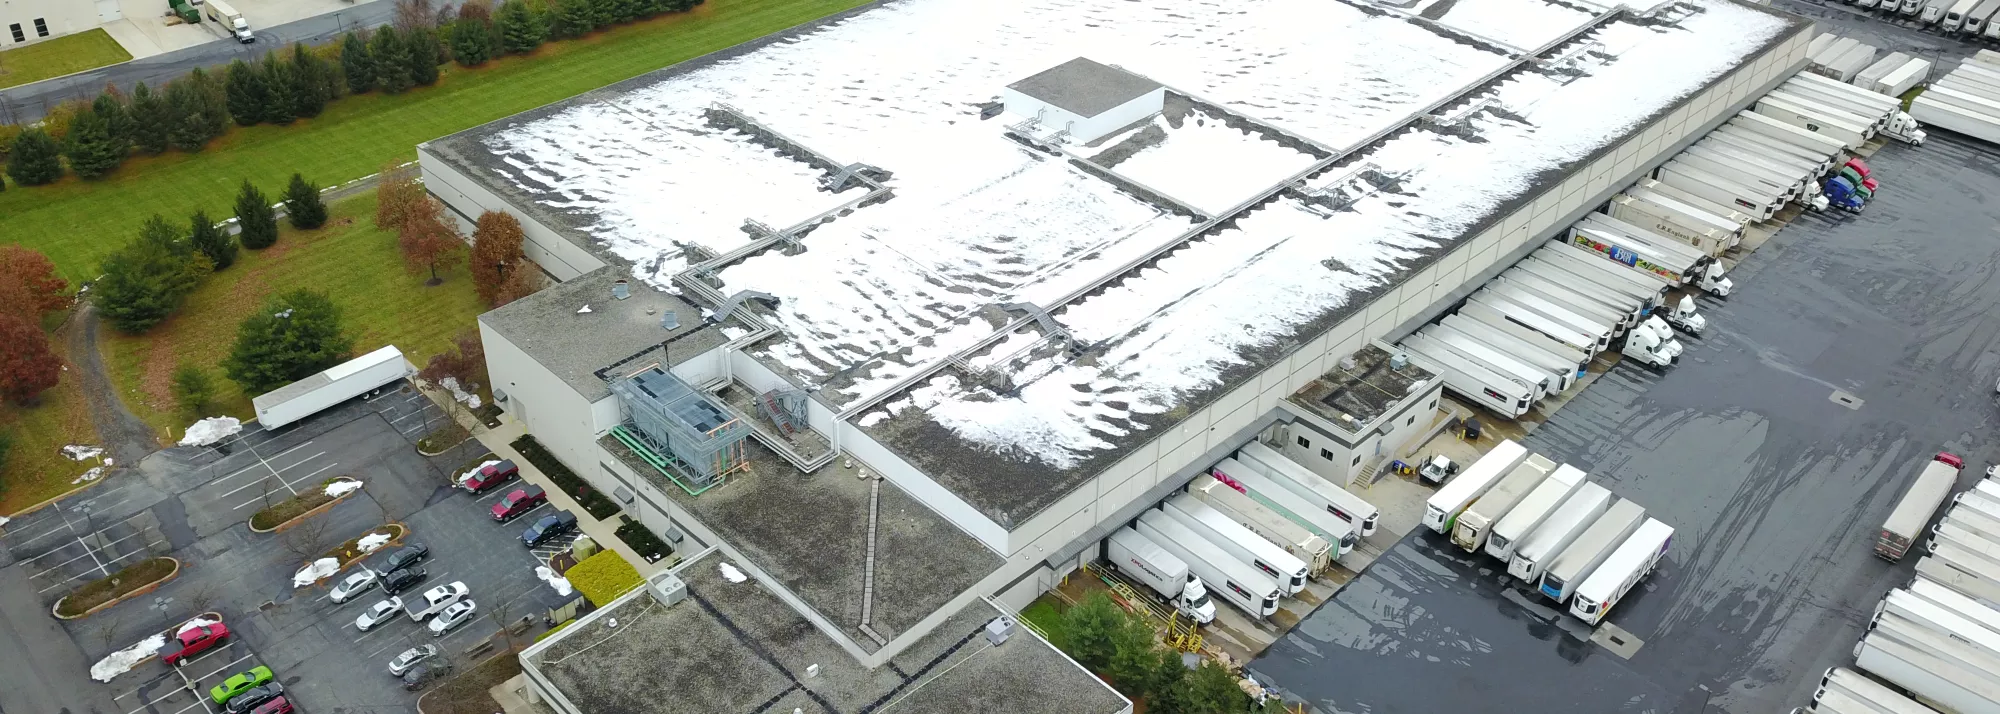 Aerial photo of Lineage's leased facility in Bethlehem, PA